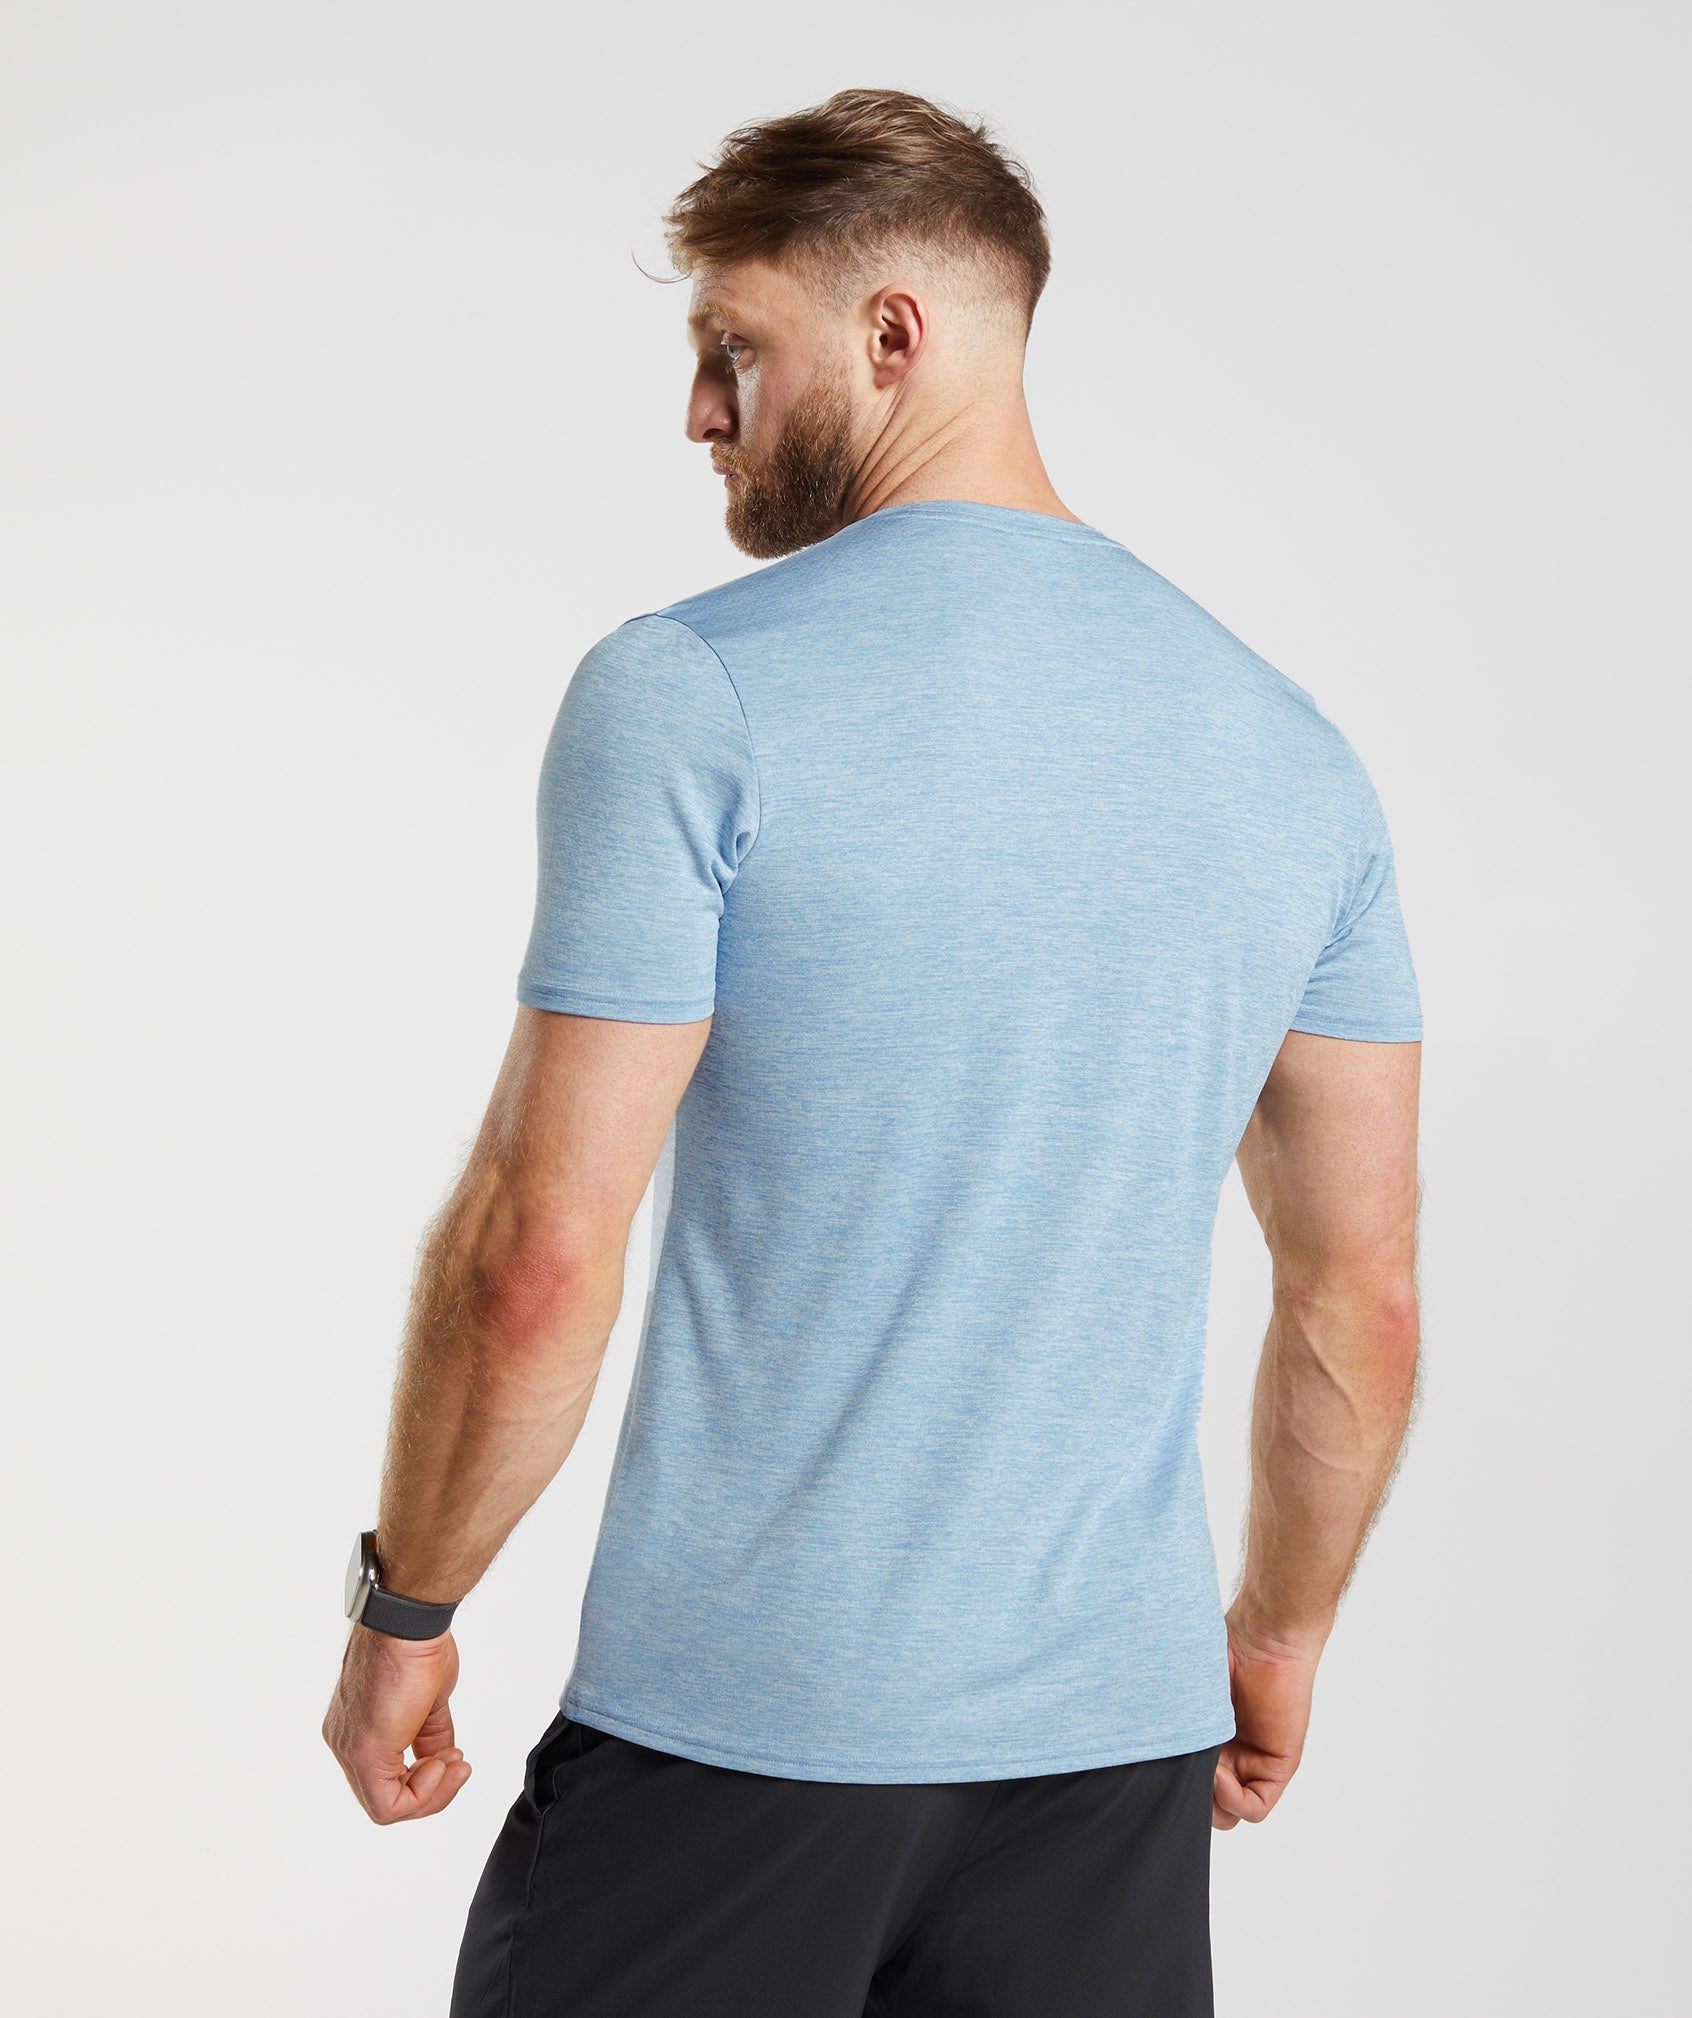 Arrival Marl T-Shirt in Ozone Blue/Skyline Blue Marl - view 2